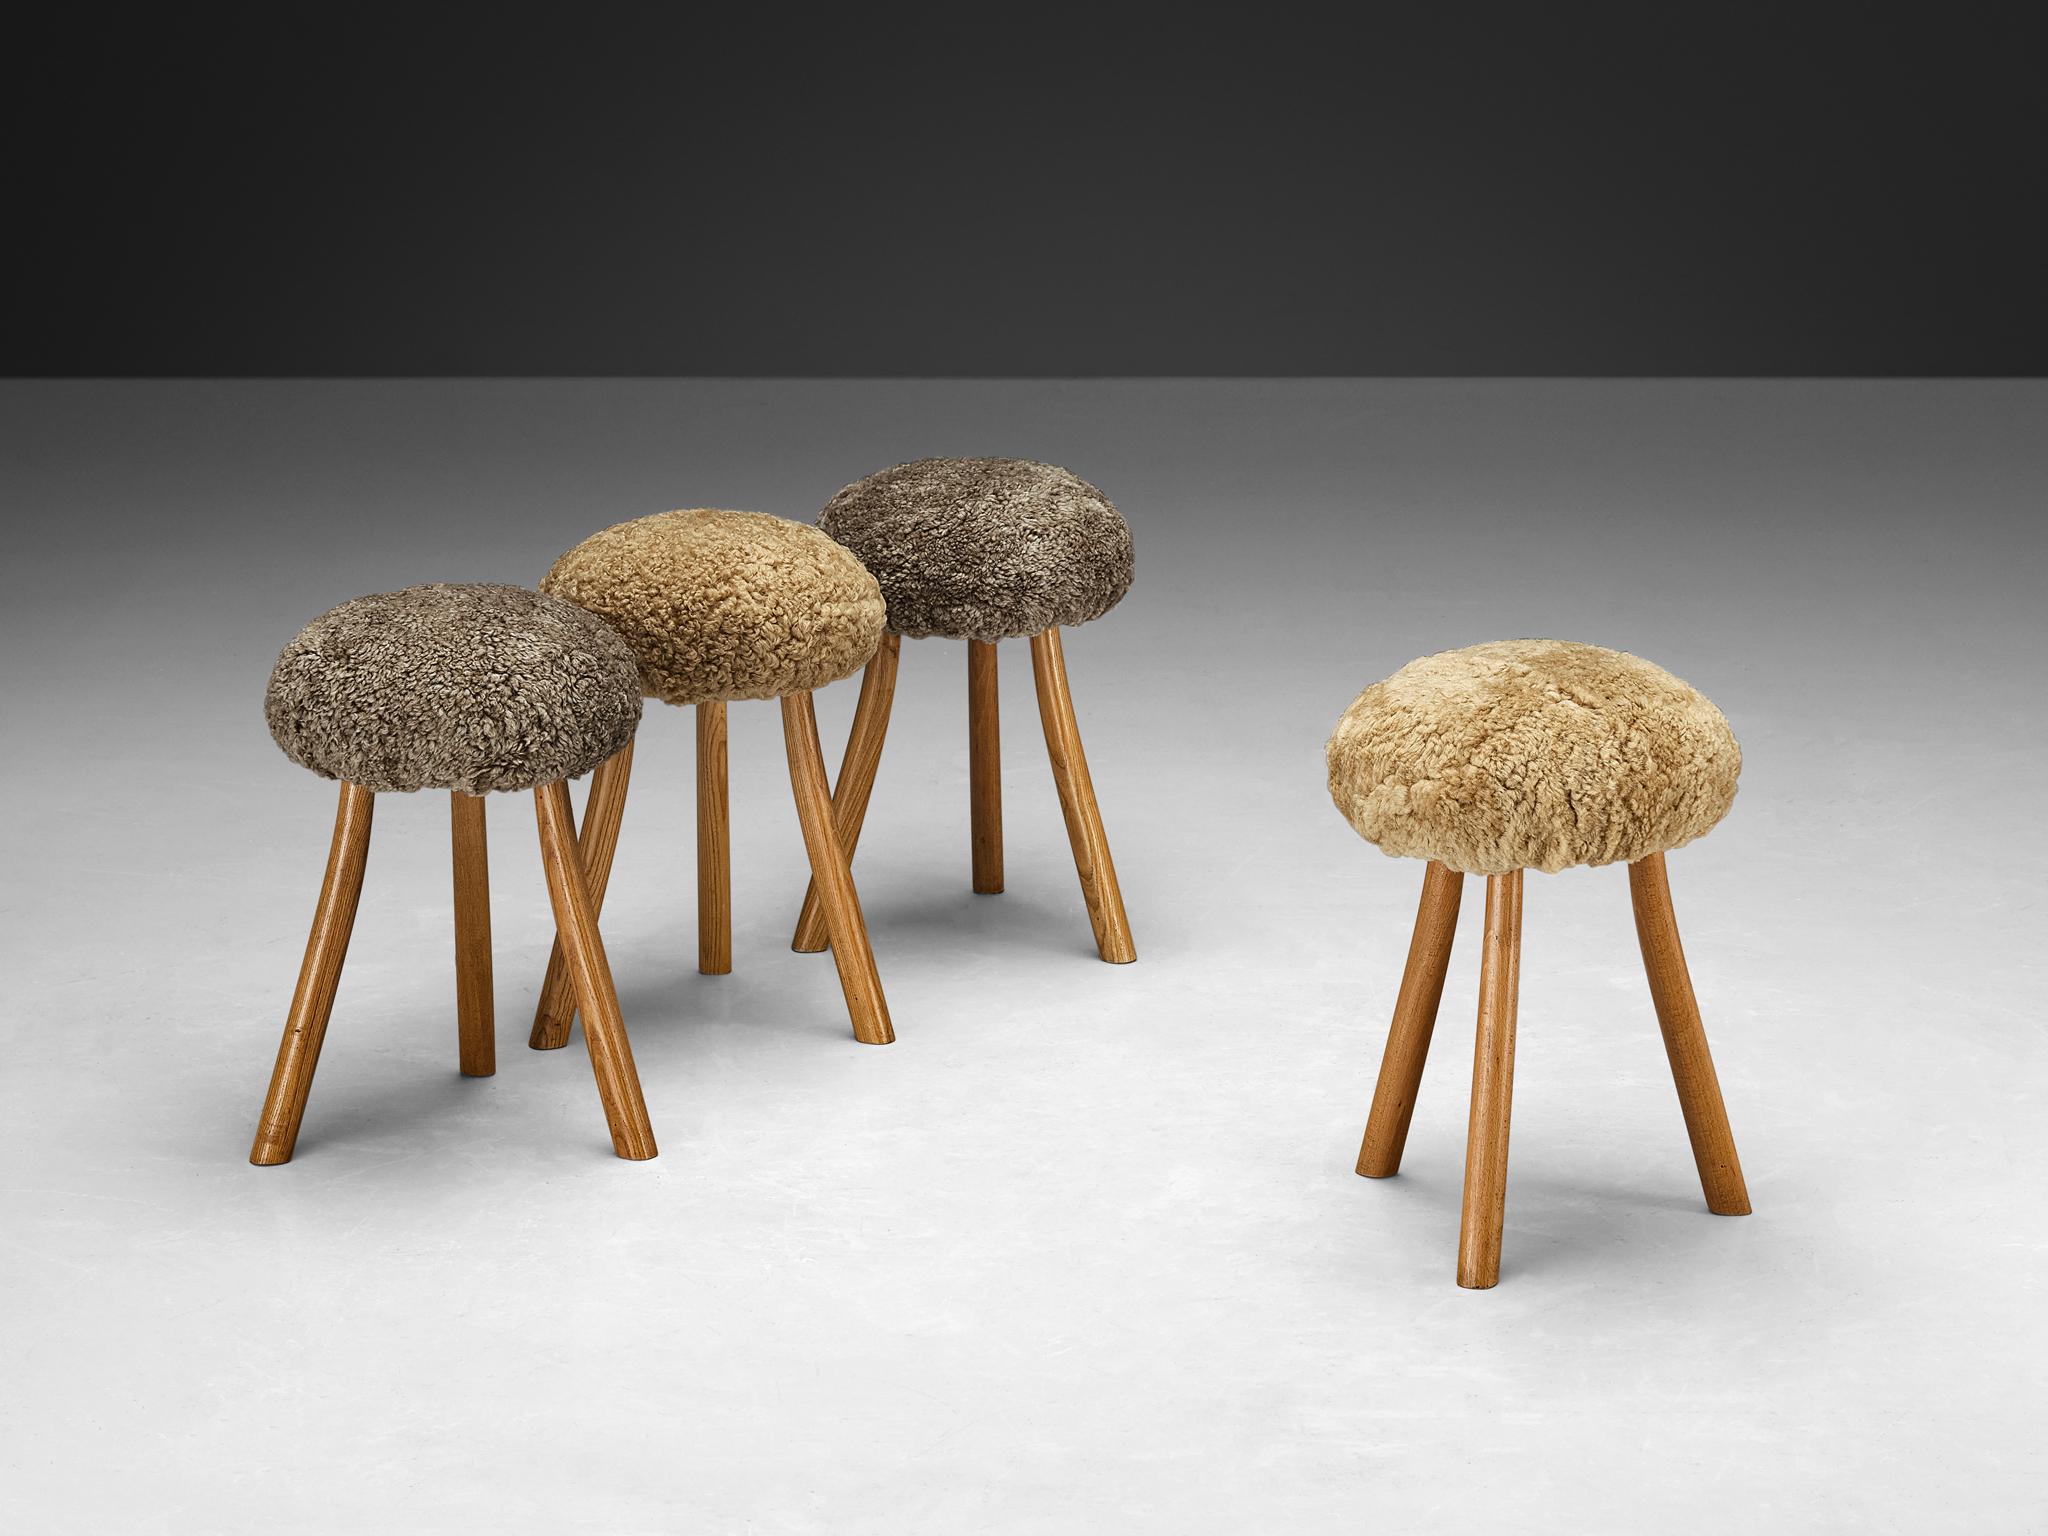 Tripod stools or side tables, solid elm, shearling wool, France, 1970s

Beautiful crafted elm stools originating from France. The seats are reupholstered in a soft shearling woolen fabric in the colors beige and grey. The feet are unevenly carved in